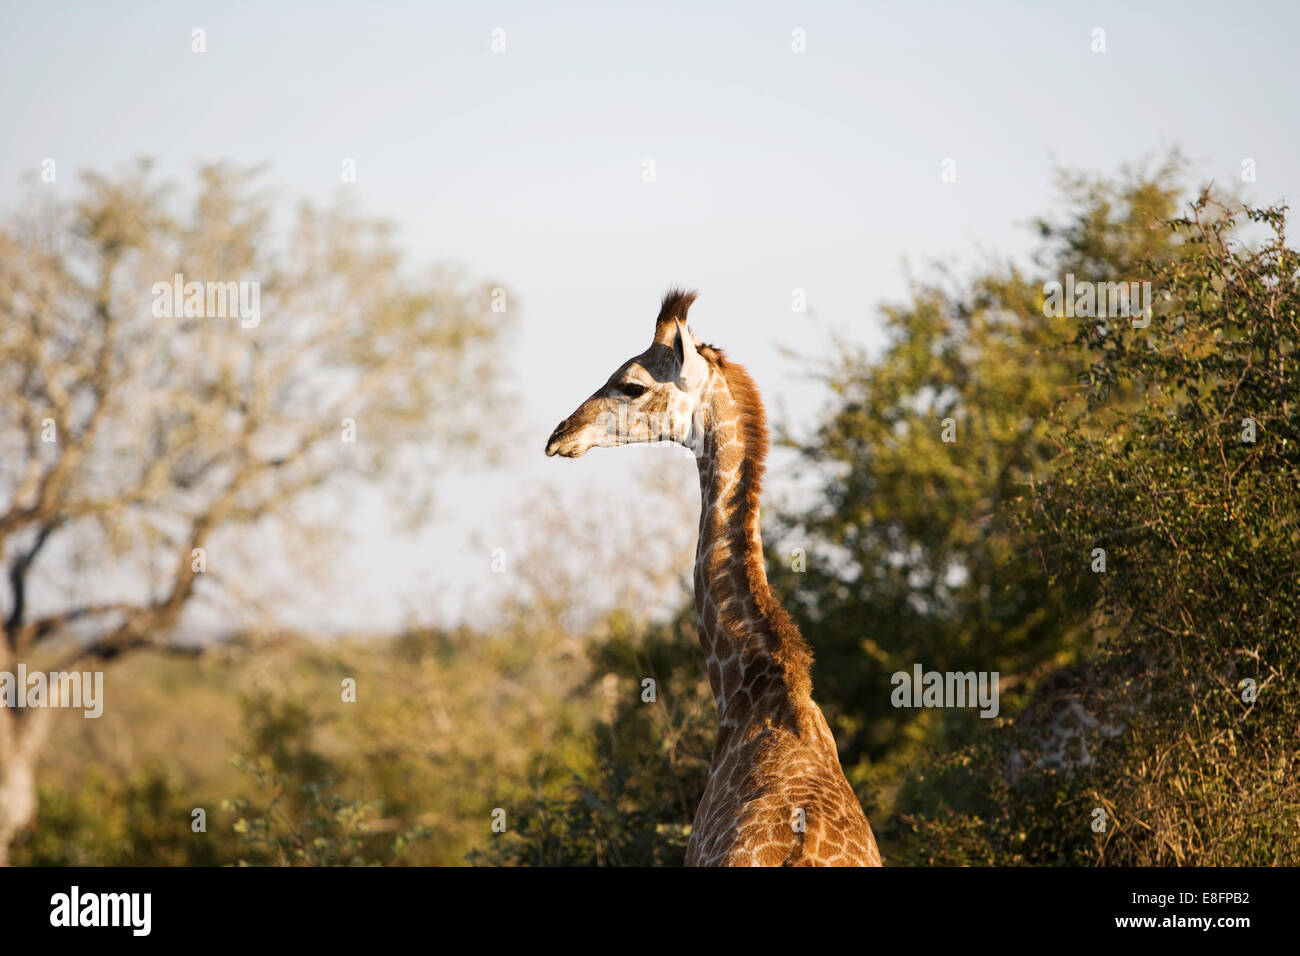 South Africa, Rear view of giraffe Stock Photo